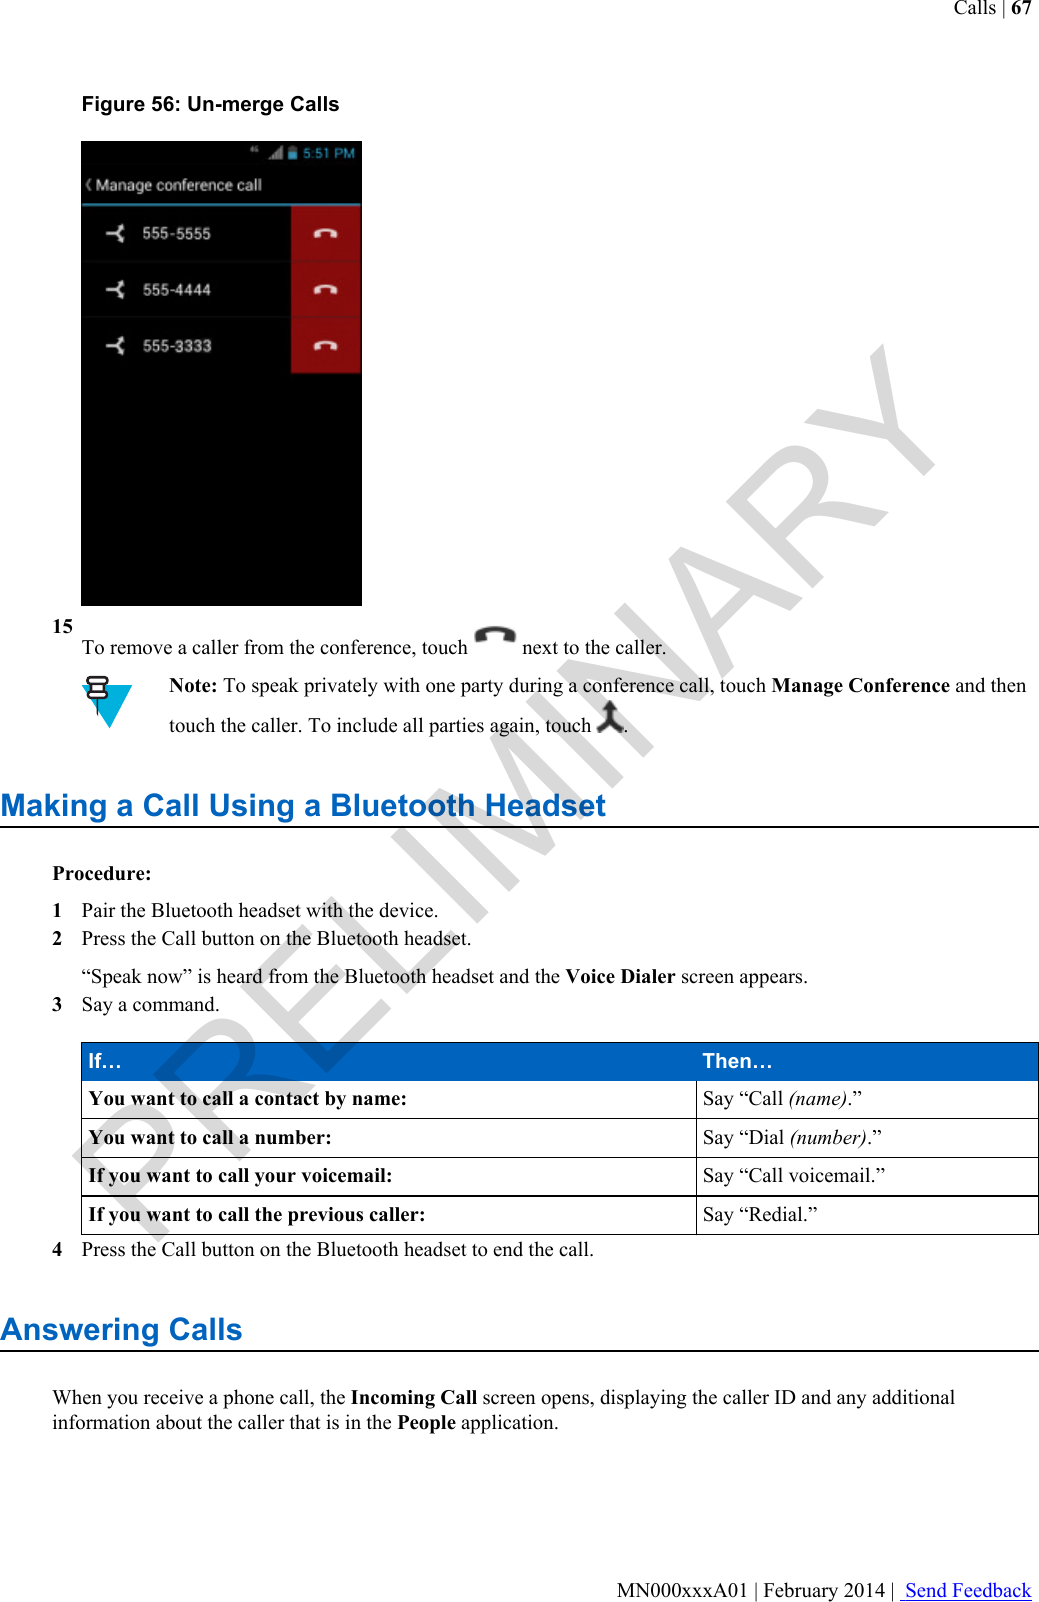 Figure 56: Un-merge Calls15To remove a caller from the conference, touch   next to the caller.Note: To speak privately with one party during a conference call, touch Manage Conference and thentouch the caller. To include all parties again, touch  .Making a Call Using a Bluetooth HeadsetProcedure:1Pair the Bluetooth headset with the device.2Press the Call button on the Bluetooth headset.“Speak now” is heard from the Bluetooth headset and the Voice Dialer screen appears.3Say a command.If… Then…You want to call a contact by name: Say “Call (name).”You want to call a number: Say “Dial (number).”If you want to call your voicemail: Say “Call voicemail.”If you want to call the previous caller: Say “Redial.”4Press the Call button on the Bluetooth headset to end the call.Answering CallsWhen you receive a phone call, the Incoming Call screen opens, displaying the caller ID and any additionalinformation about the caller that is in the People application.Calls | 67MN000xxxA01 | February 2014 |  Send FeedbackPRELIMINARY